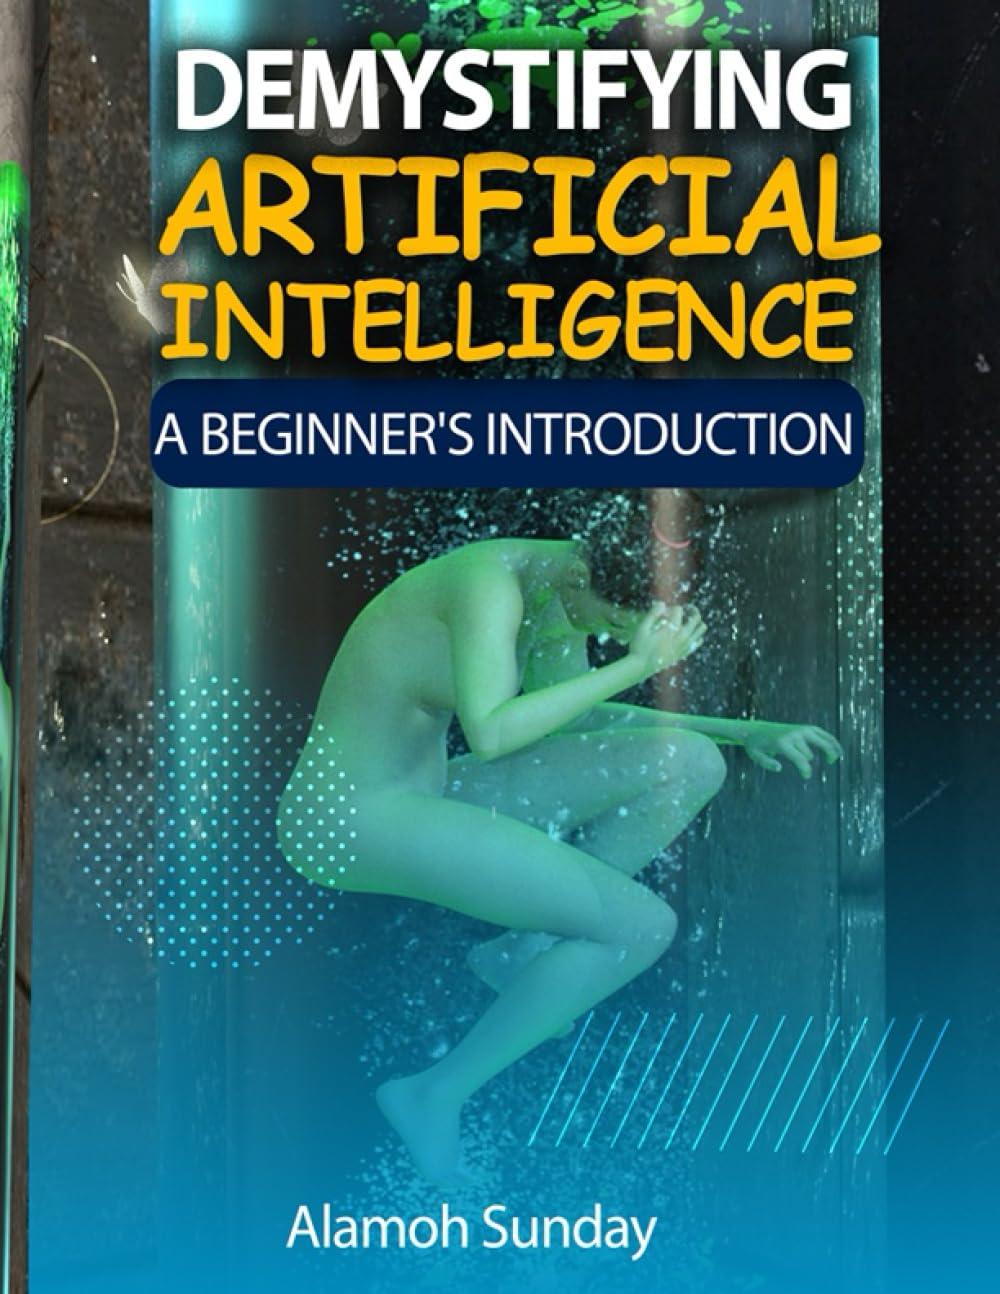 demystifying artificial intelligence a beginner's introduction 1st edition alamoh sunday b0ch2qpf38,